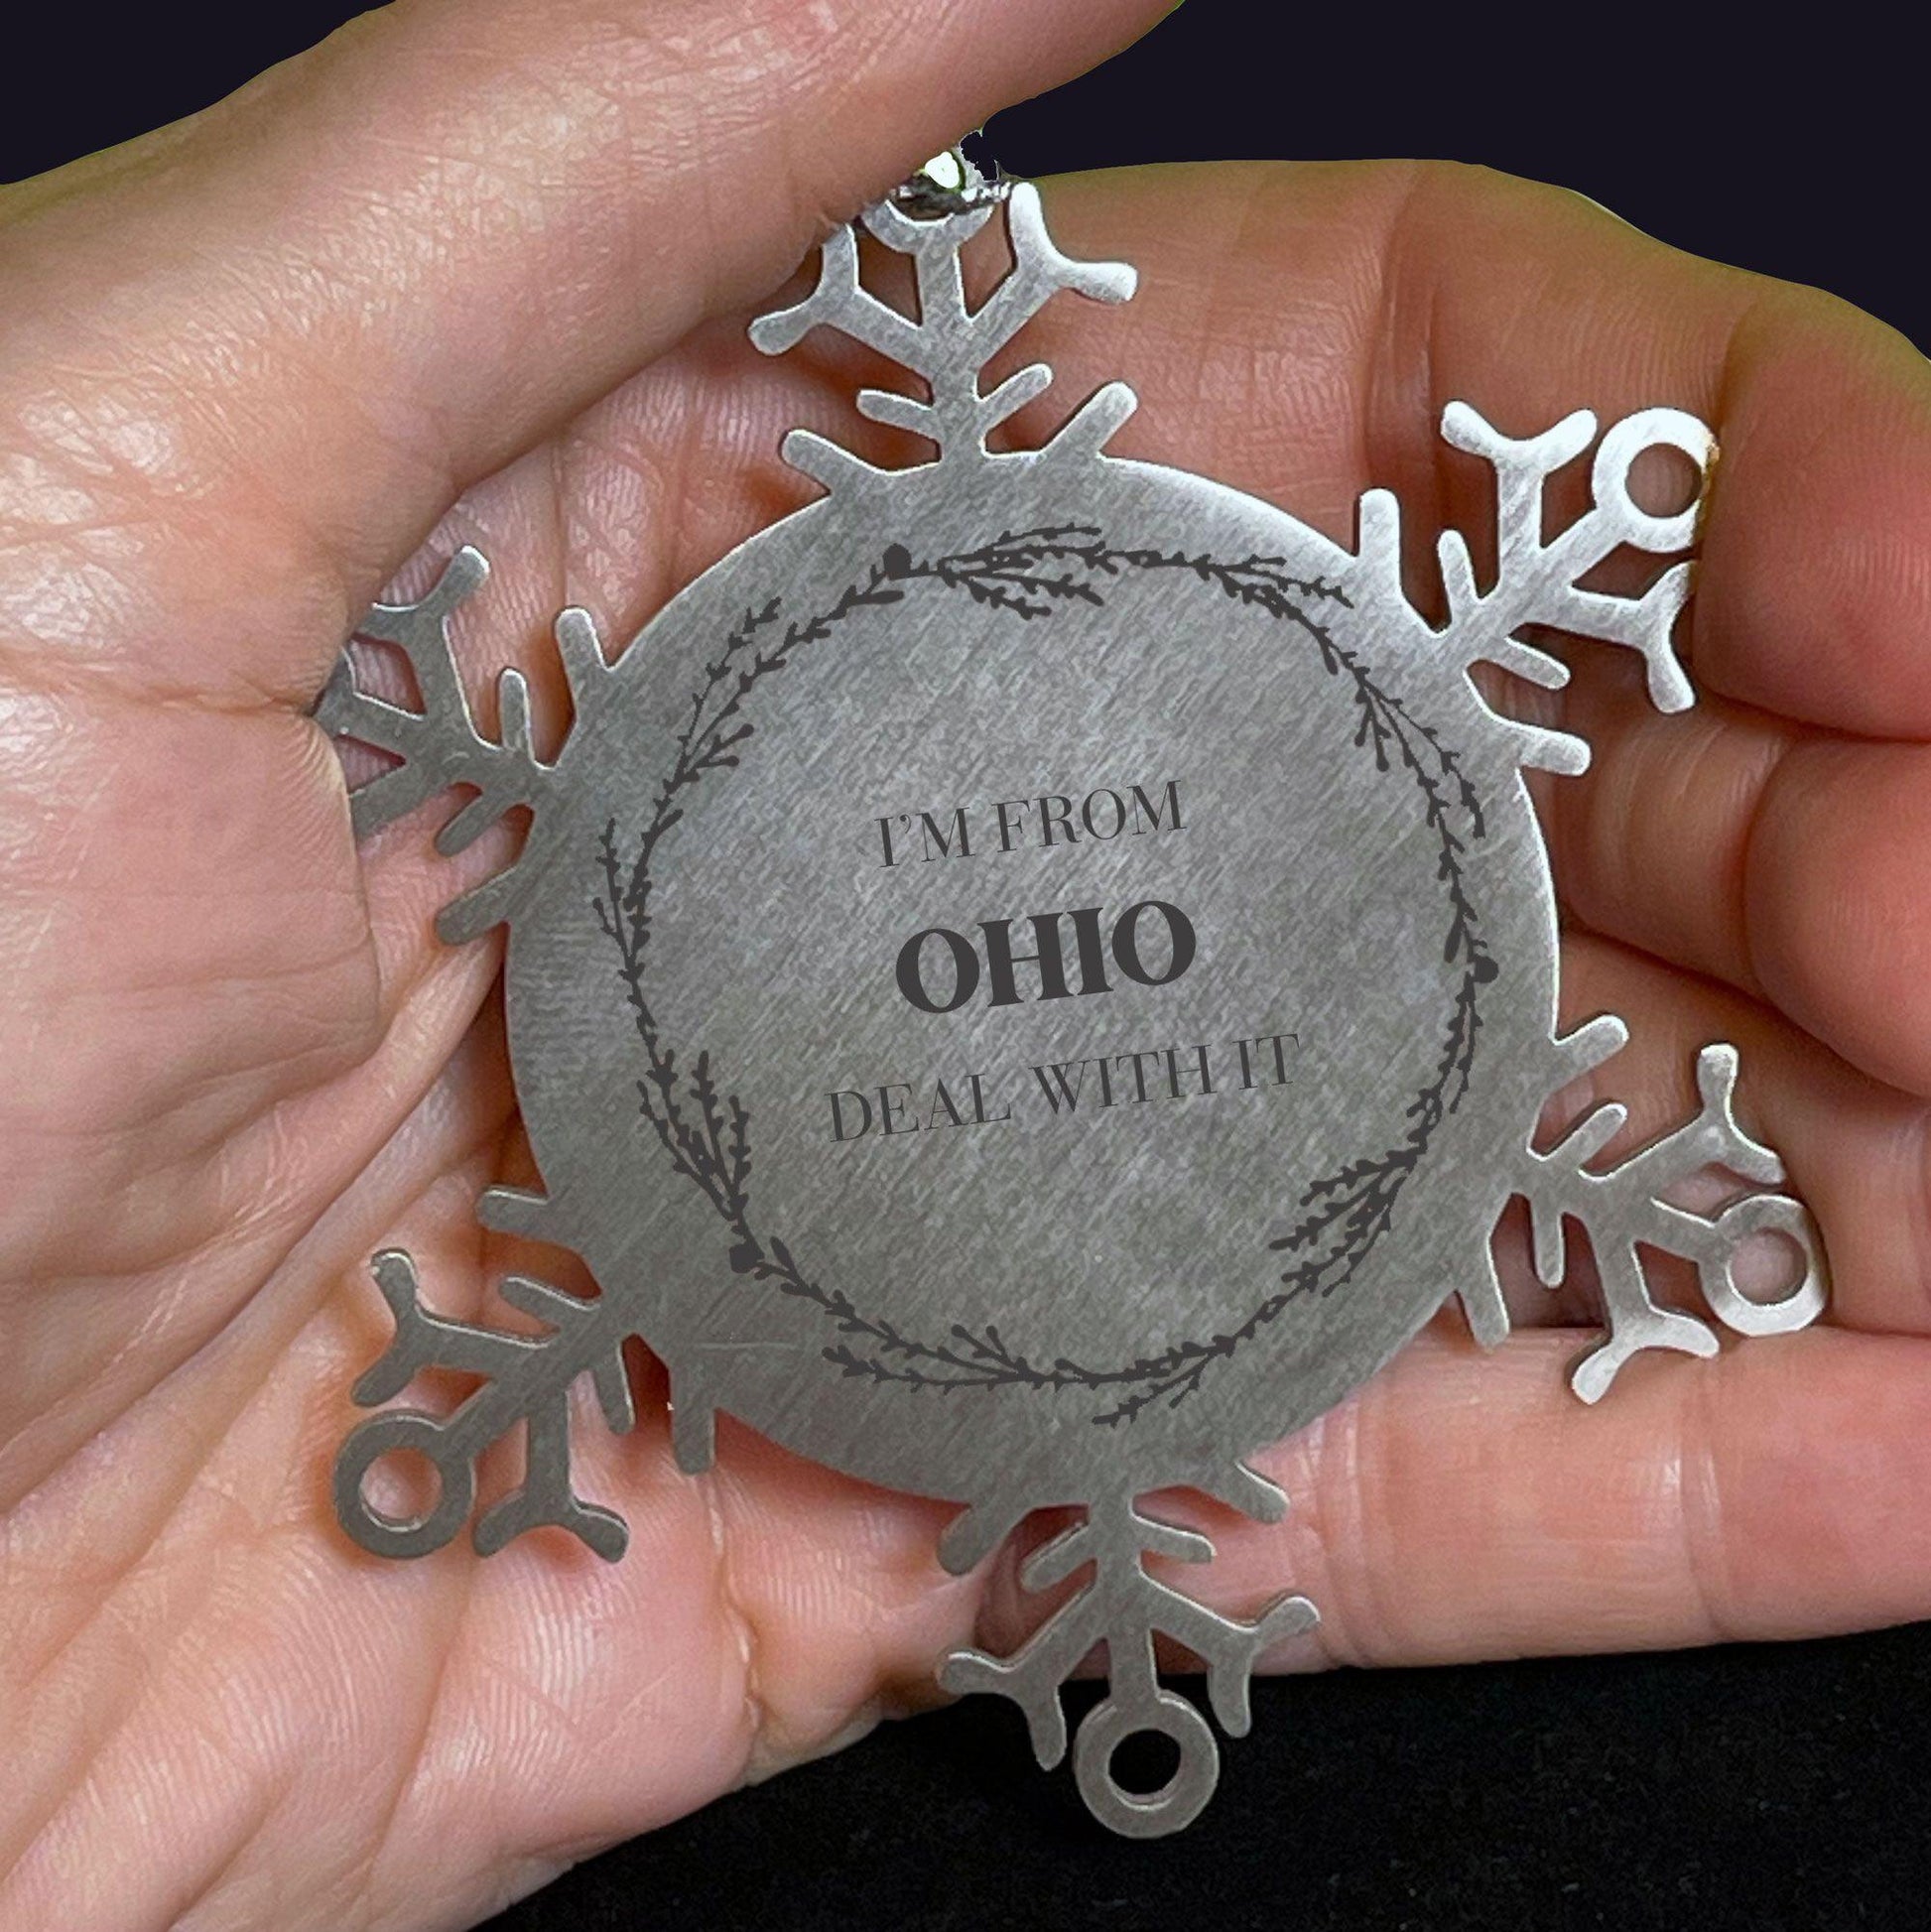 I'm from Ohio, Deal with it, Proud Ohio State Ornament Gifts, Ohio Snowflake Ornament Gift Idea, Christmas Gifts for Ohio People, Coworkers, Colleague - Mallard Moon Gift Shop